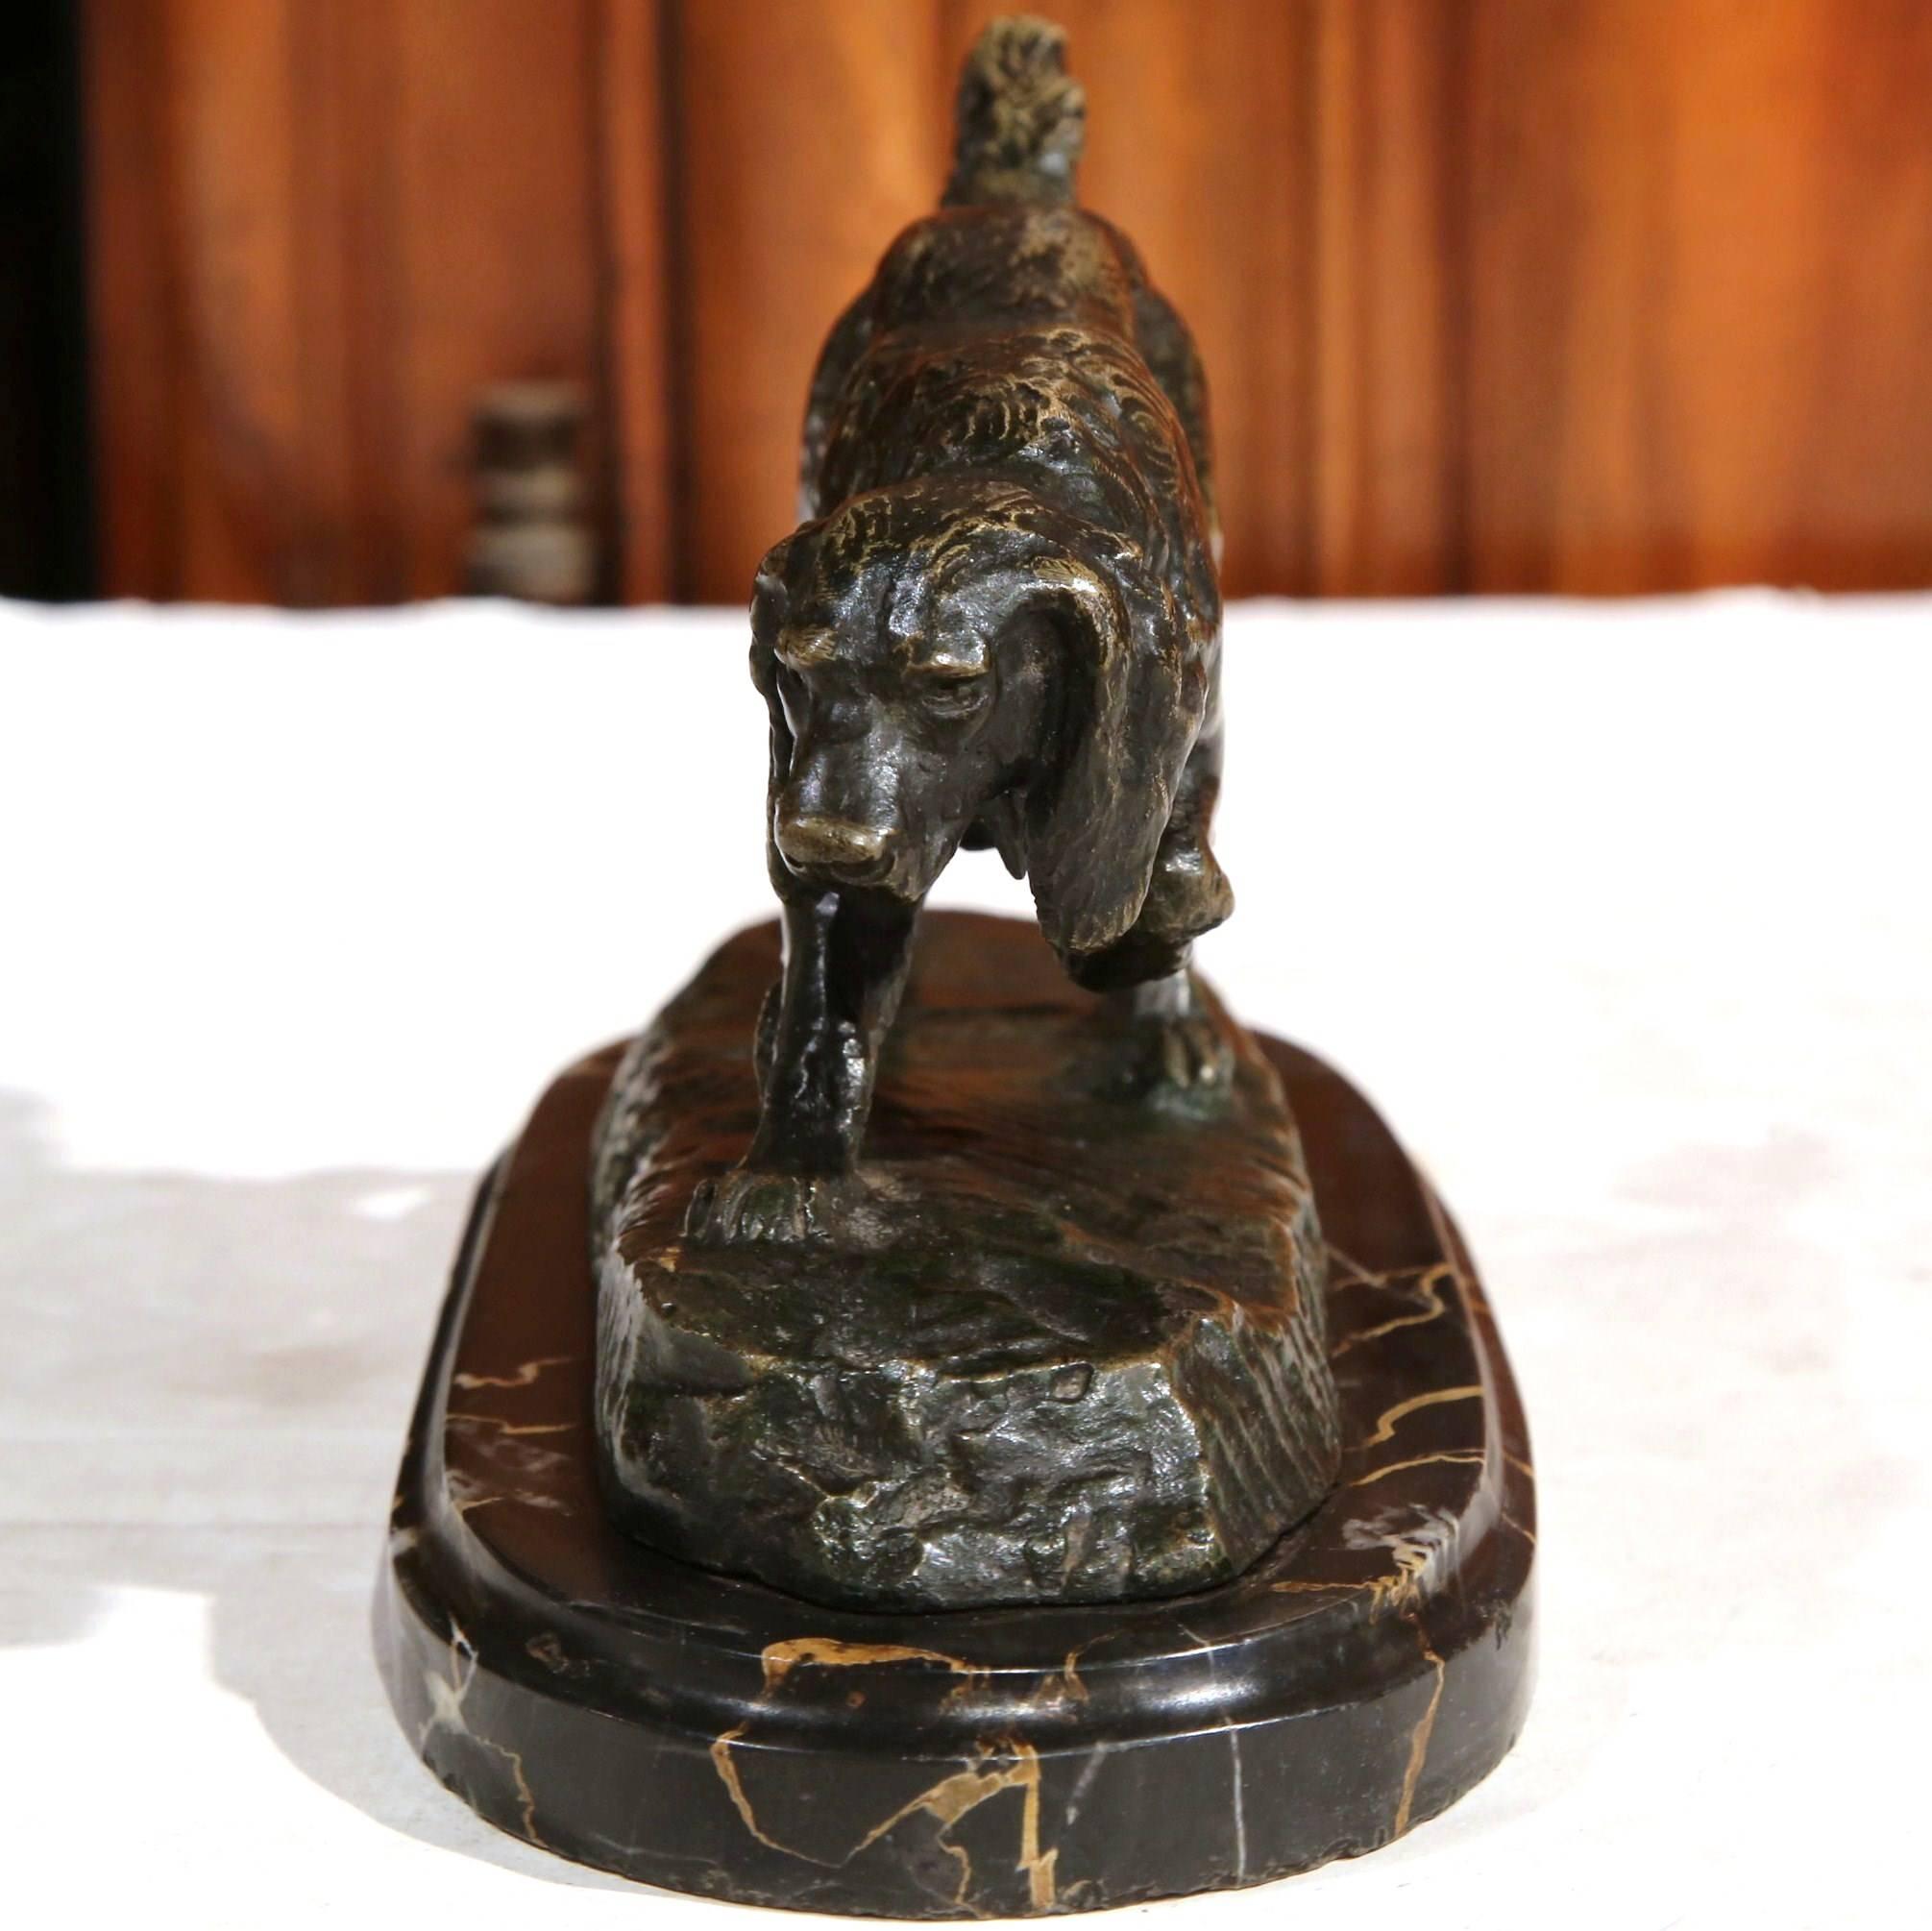 Hand-Crafted 19th Century French Bronze Pointer Dog Sculpture on Marble Base Signed Barye